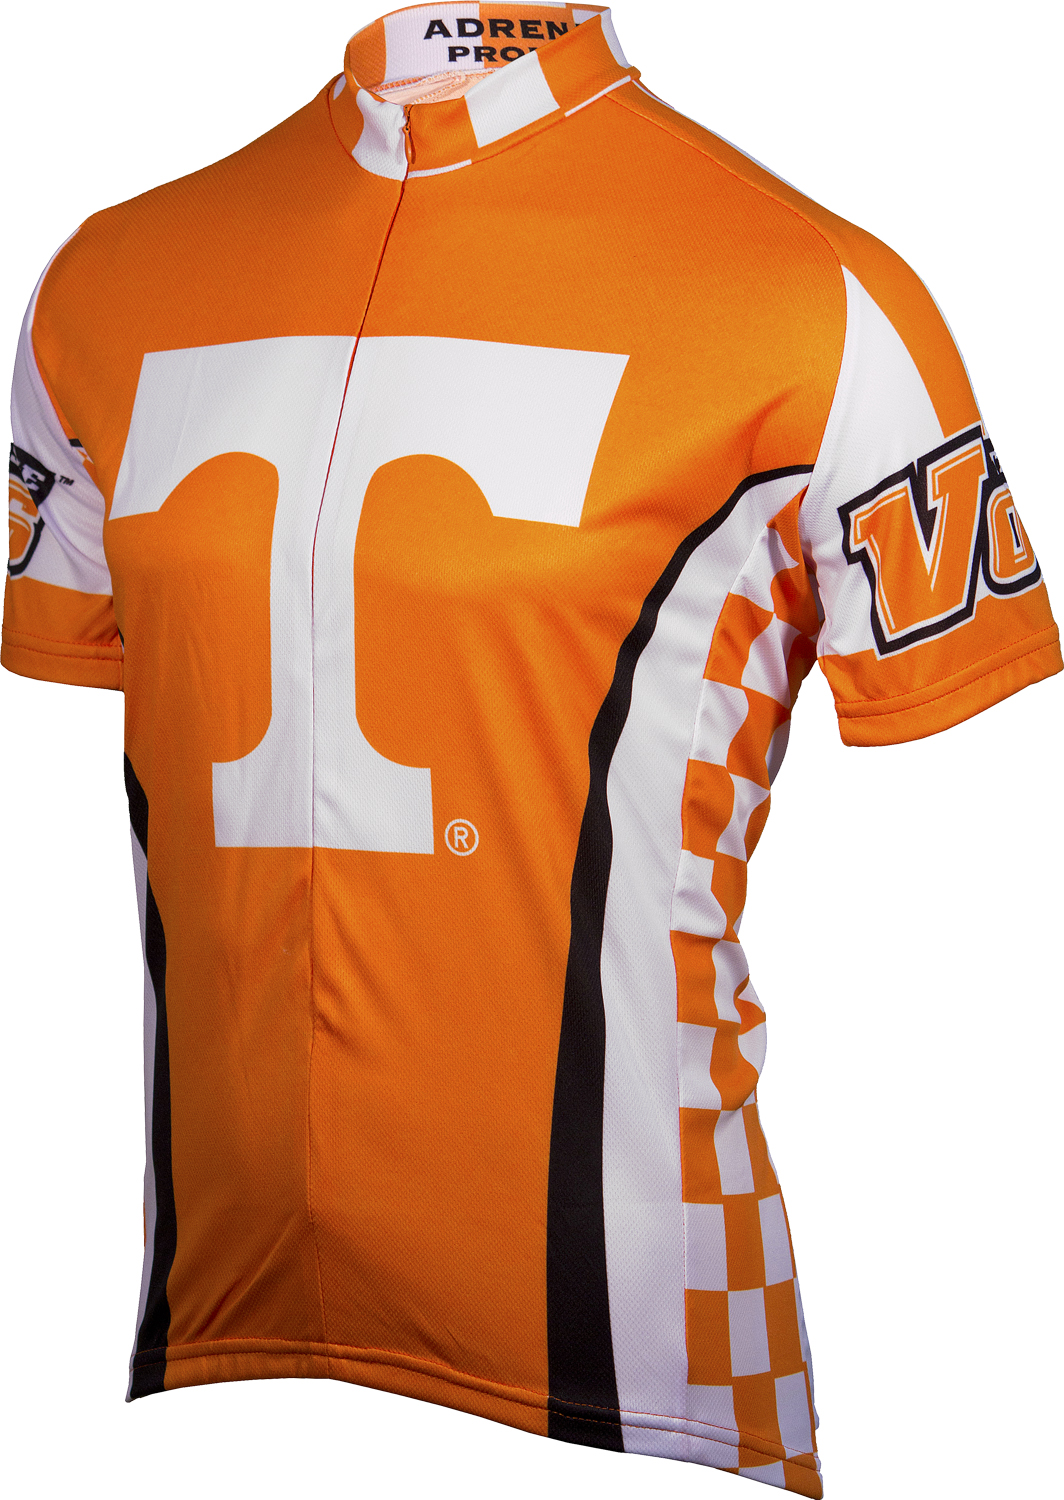 University of Tennessee Volunteers Cycling Jersey